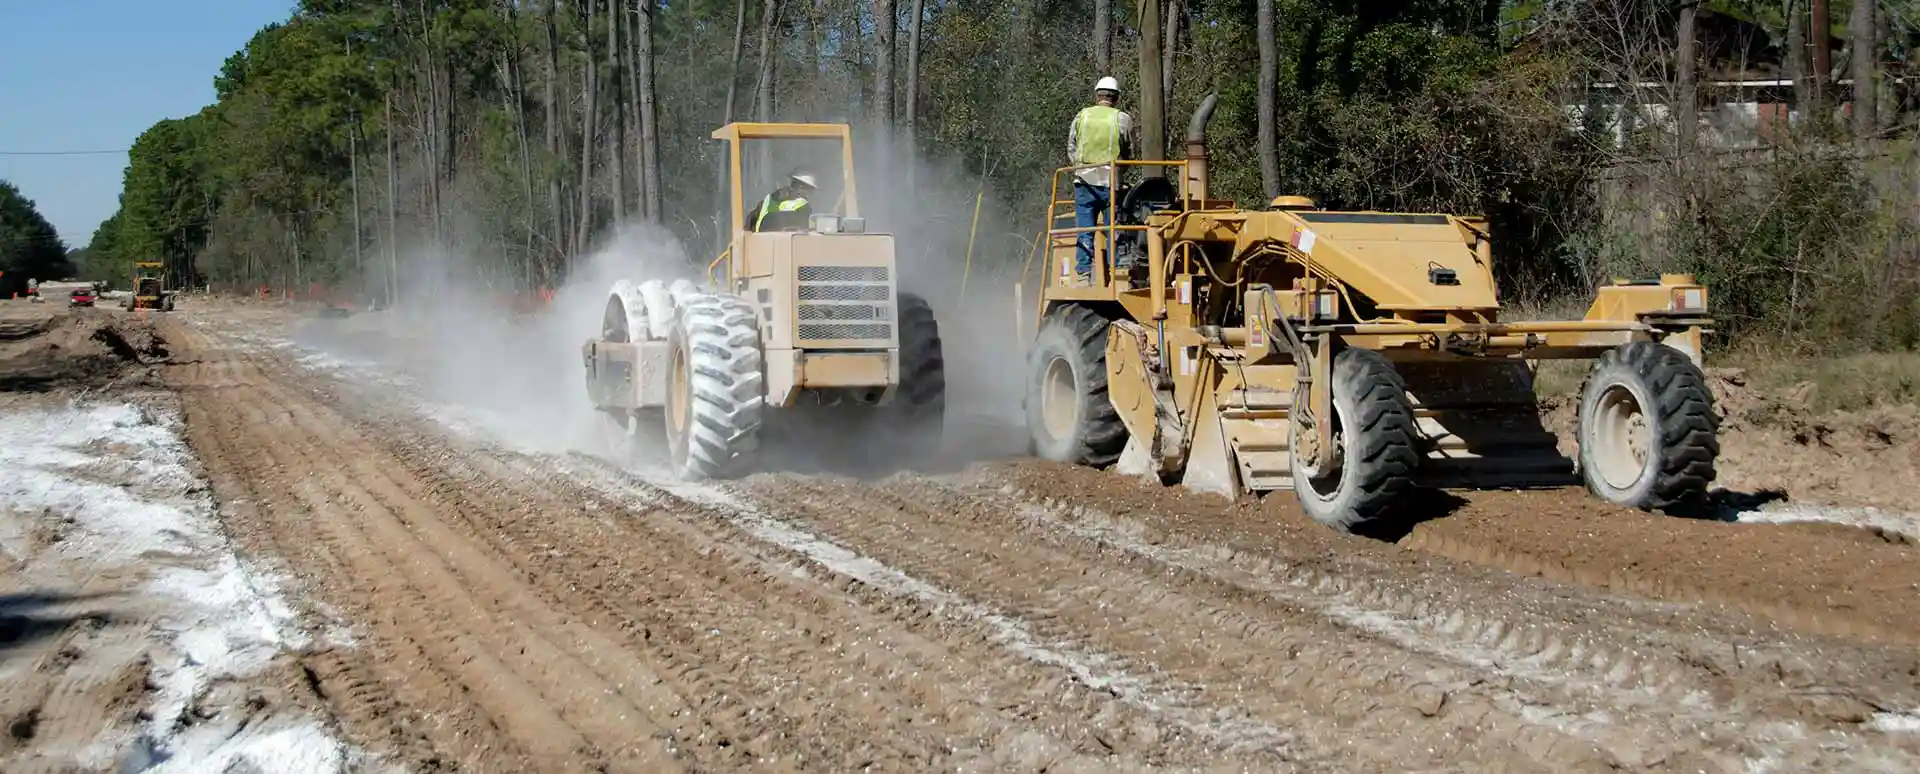 Road Construction- Tiller And Compactor Stabilizing The Soil